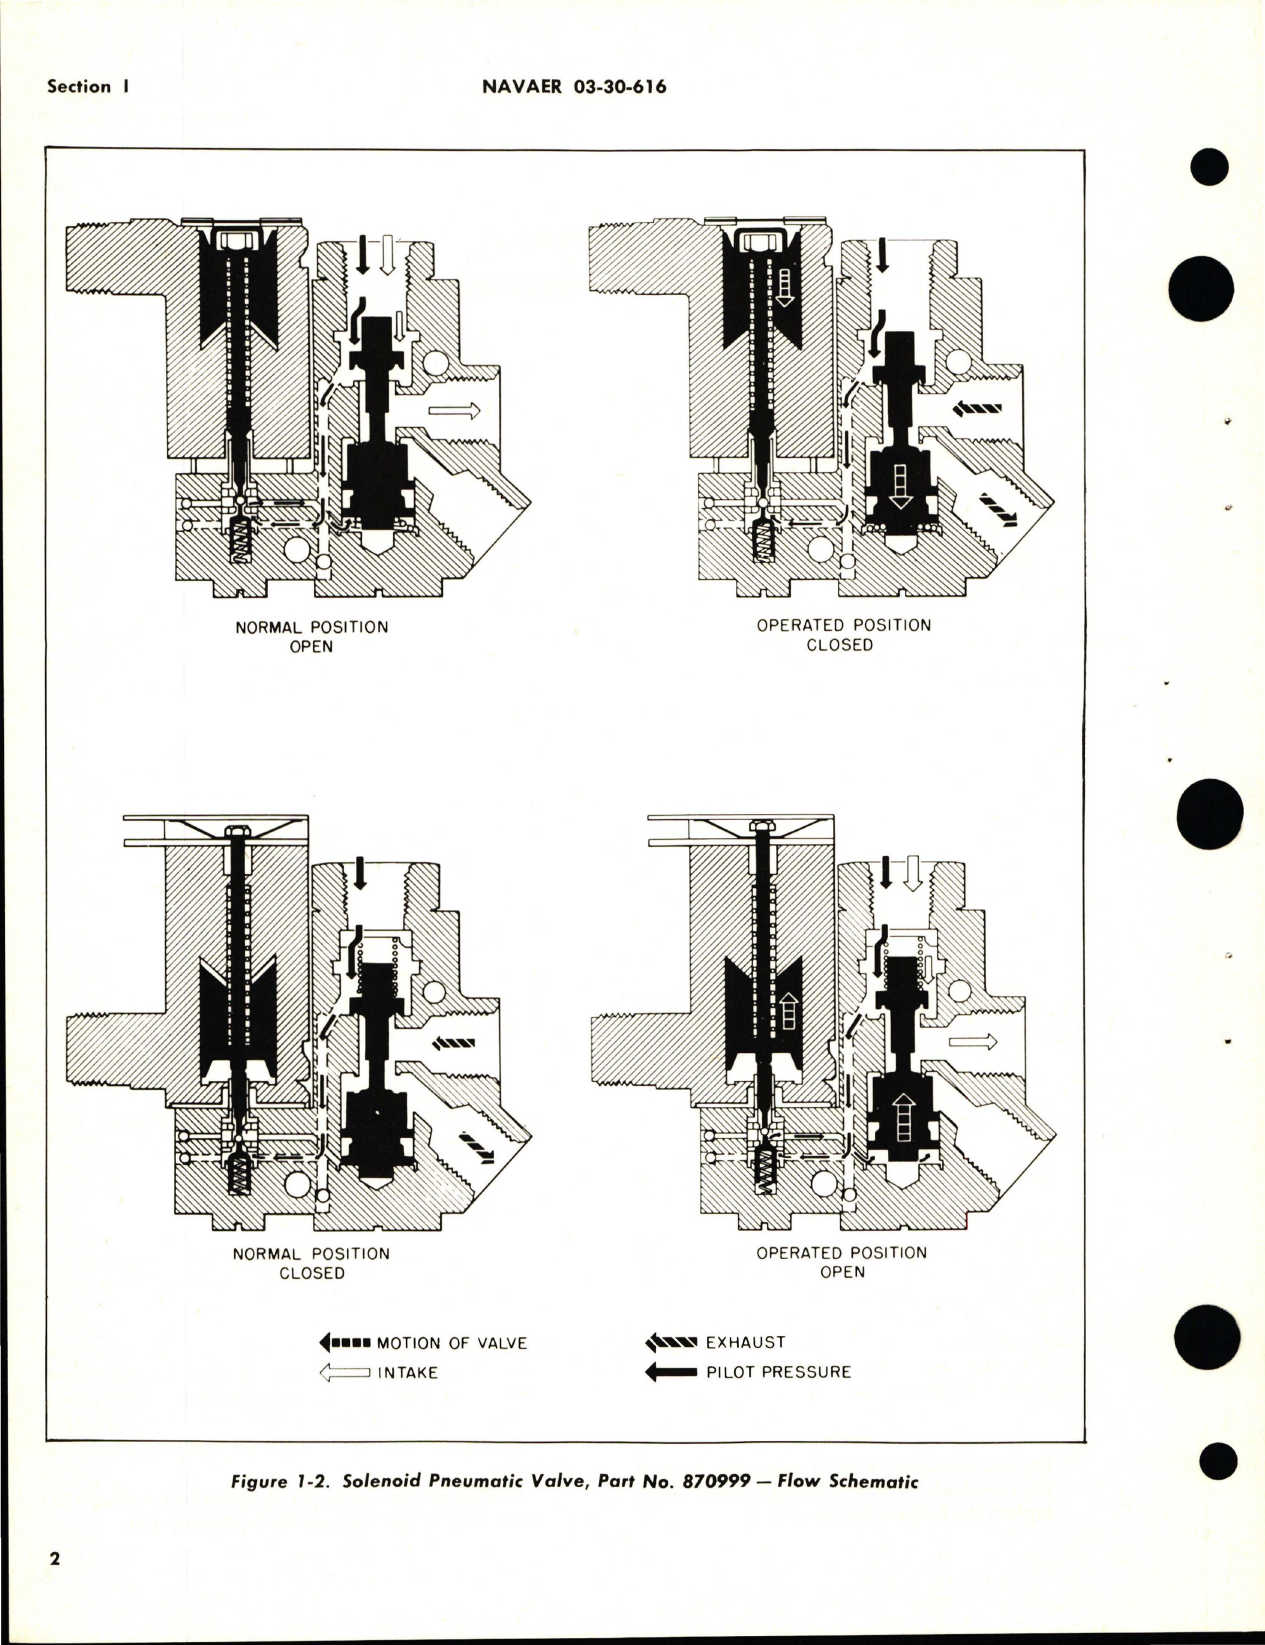 Sample page 6 from AirCorps Library document: Overhaul Instructions for Solenoid Pneumatic Valves